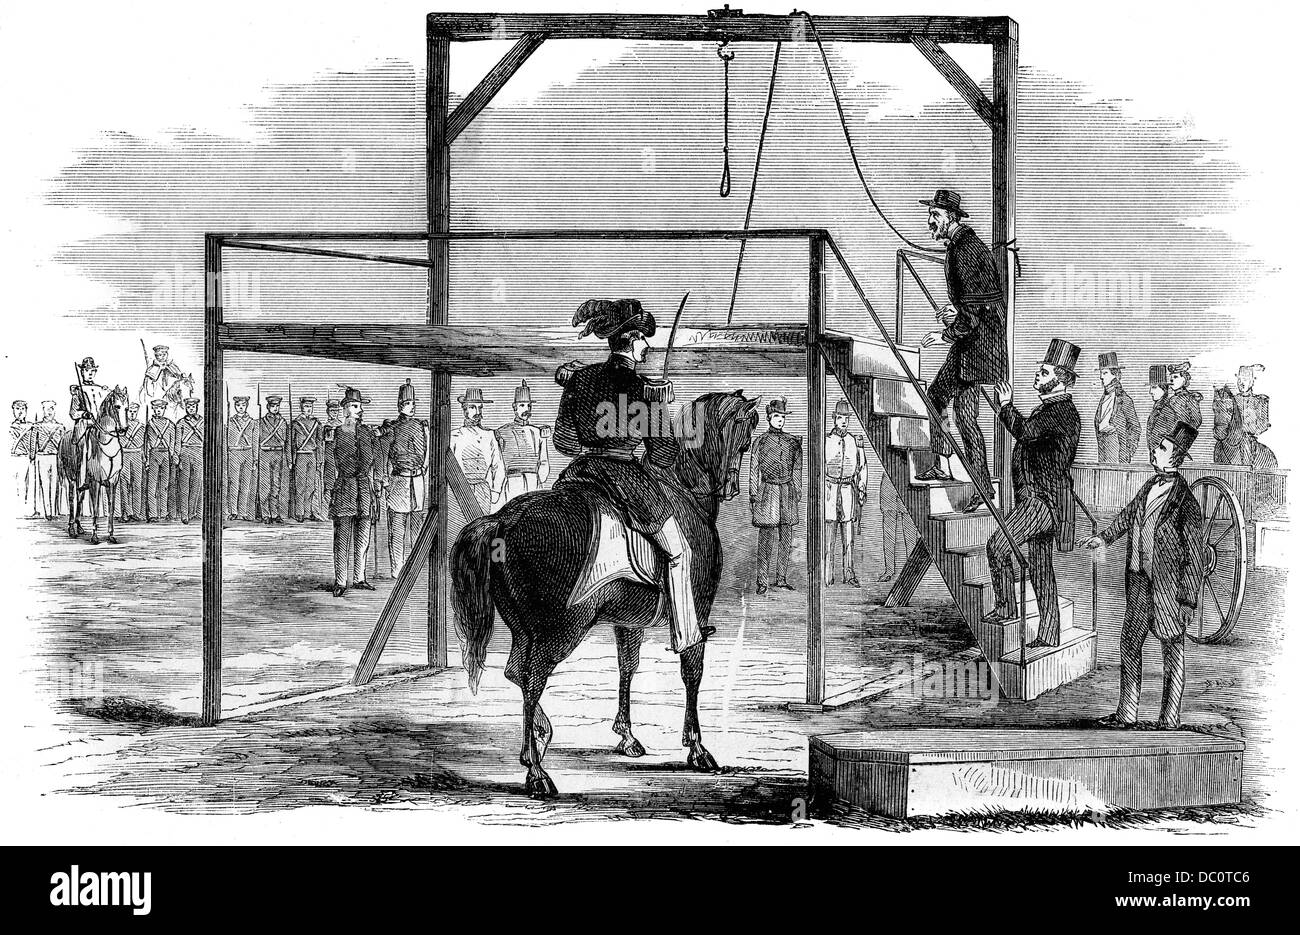 1800s 1850s DECEMBER 1859 JOHN BROWN ASCENDING THE SCAFFOLD TO BE HANGED FROM HARPER'S WEEKLY Stock Photo